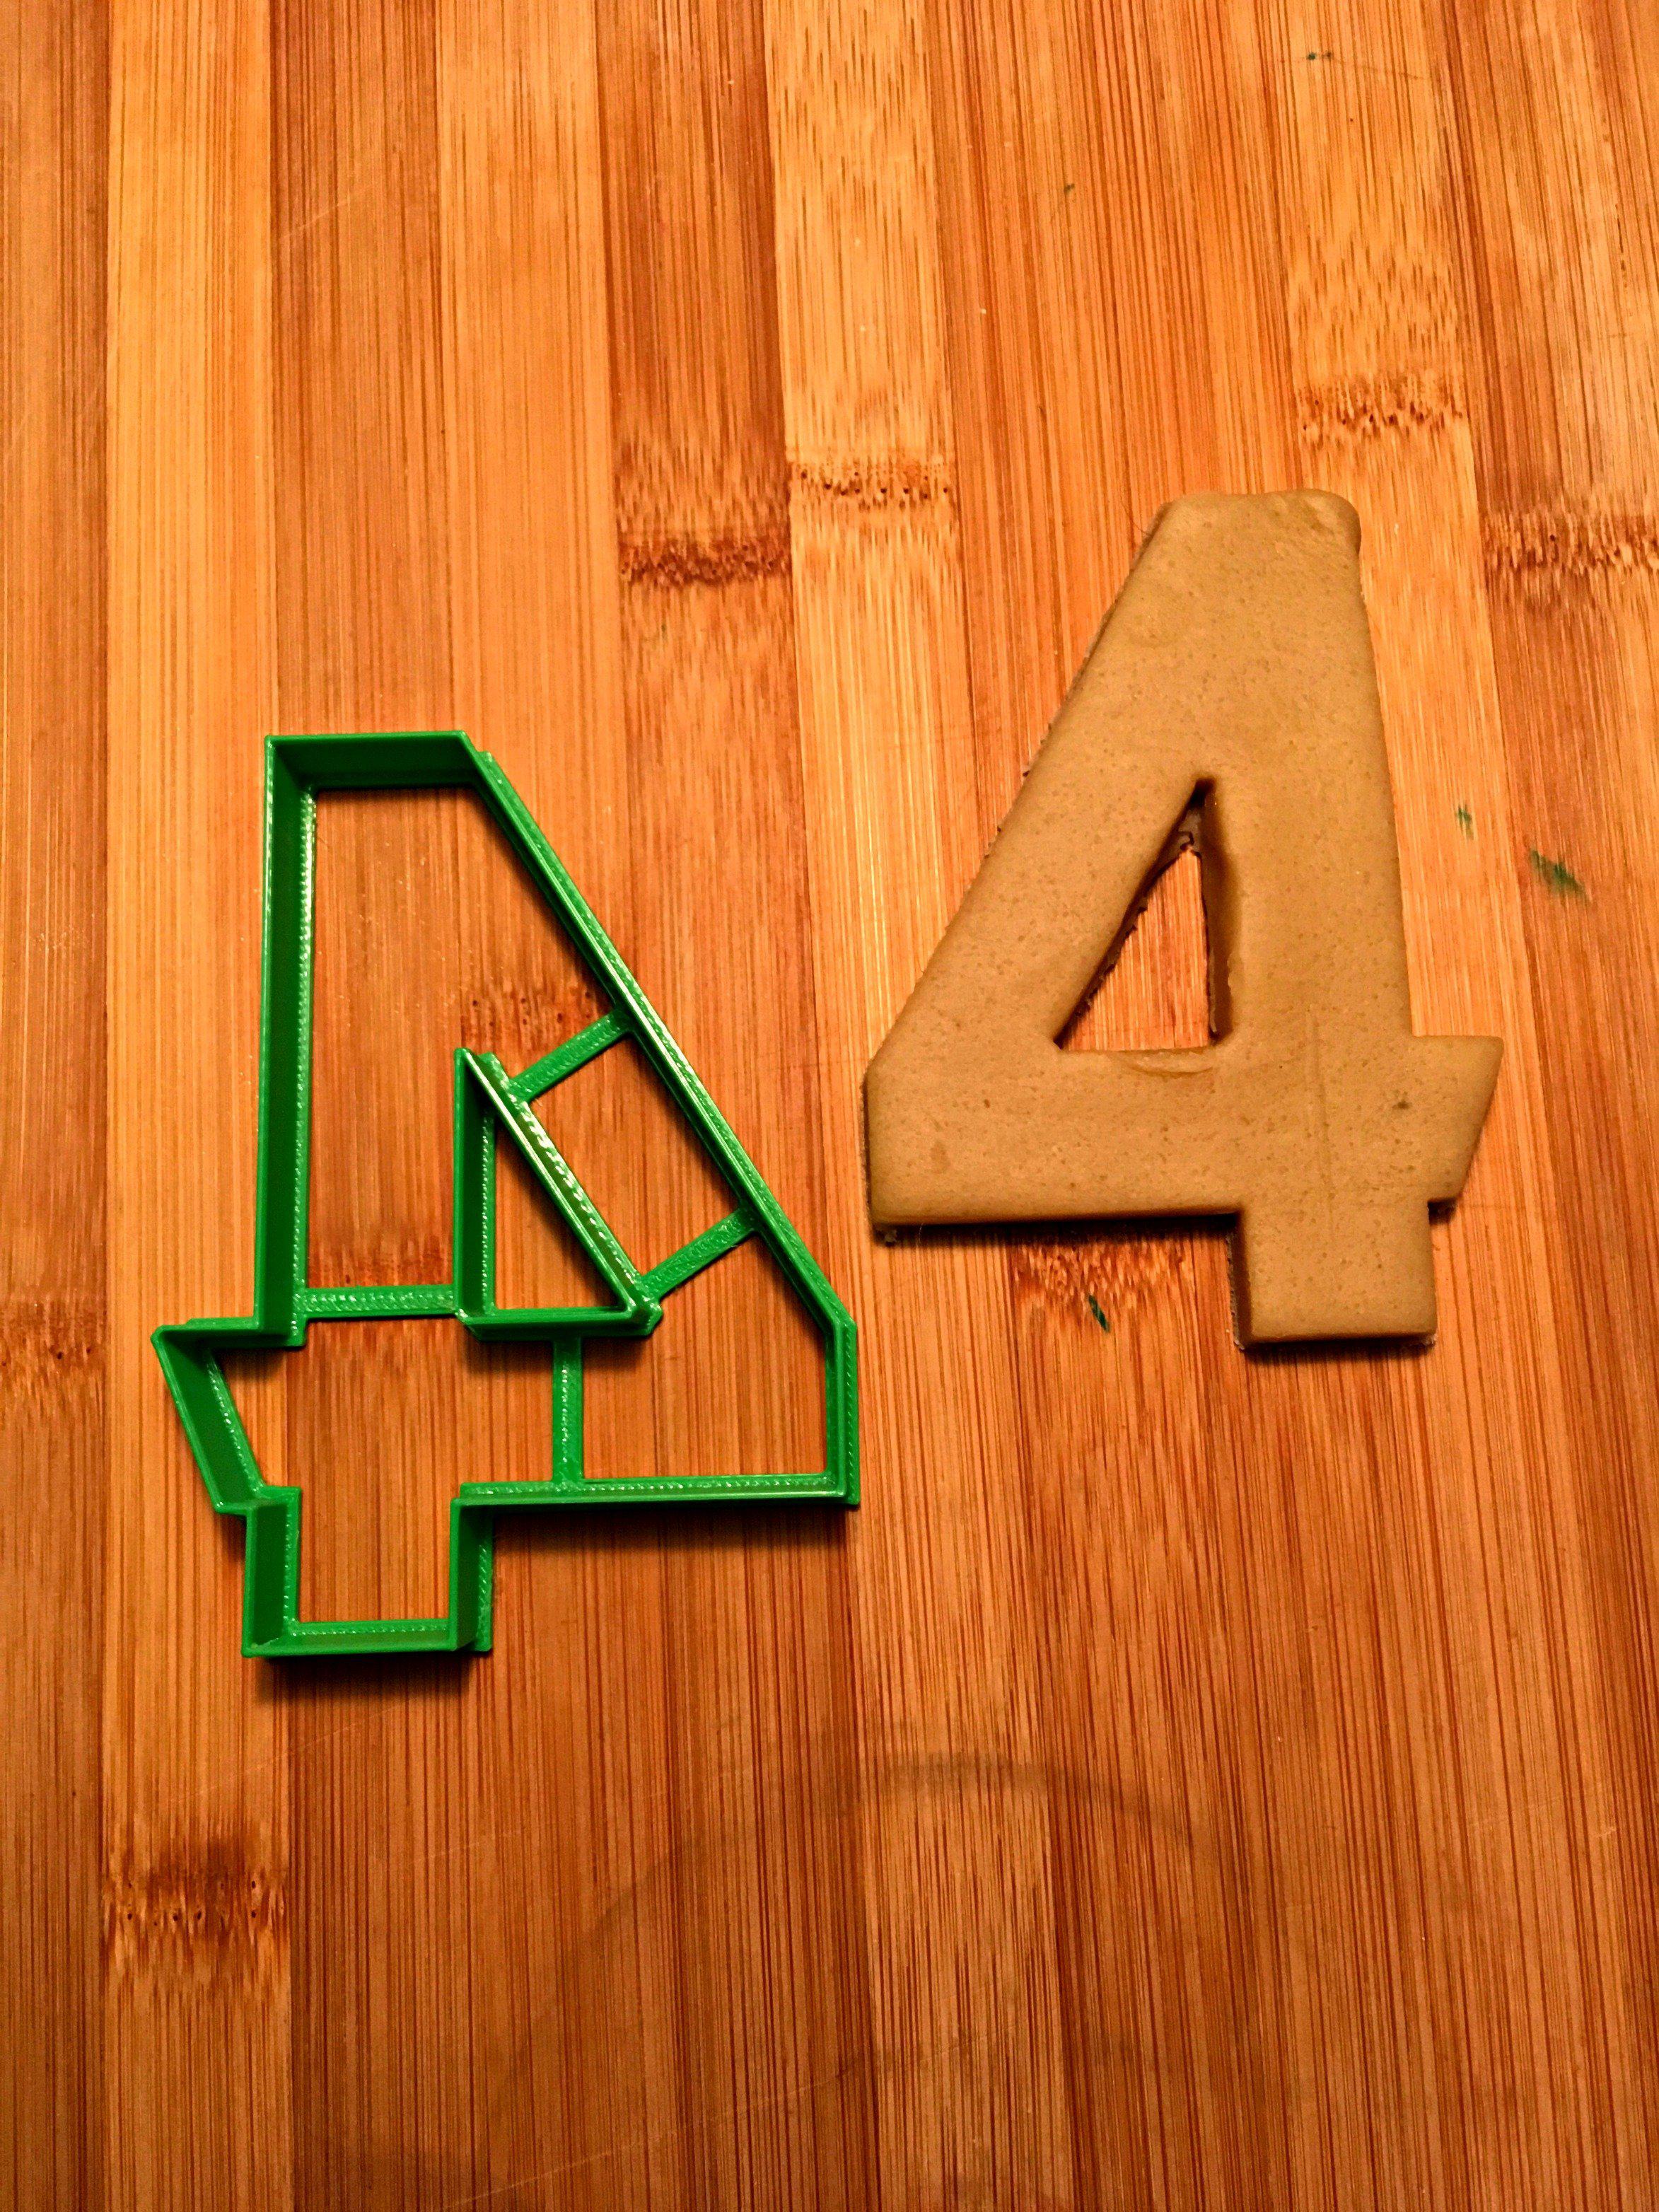 Number 4 Cookie Cutter/Creates a Cut-Out of the Center/Dishwasher Safe